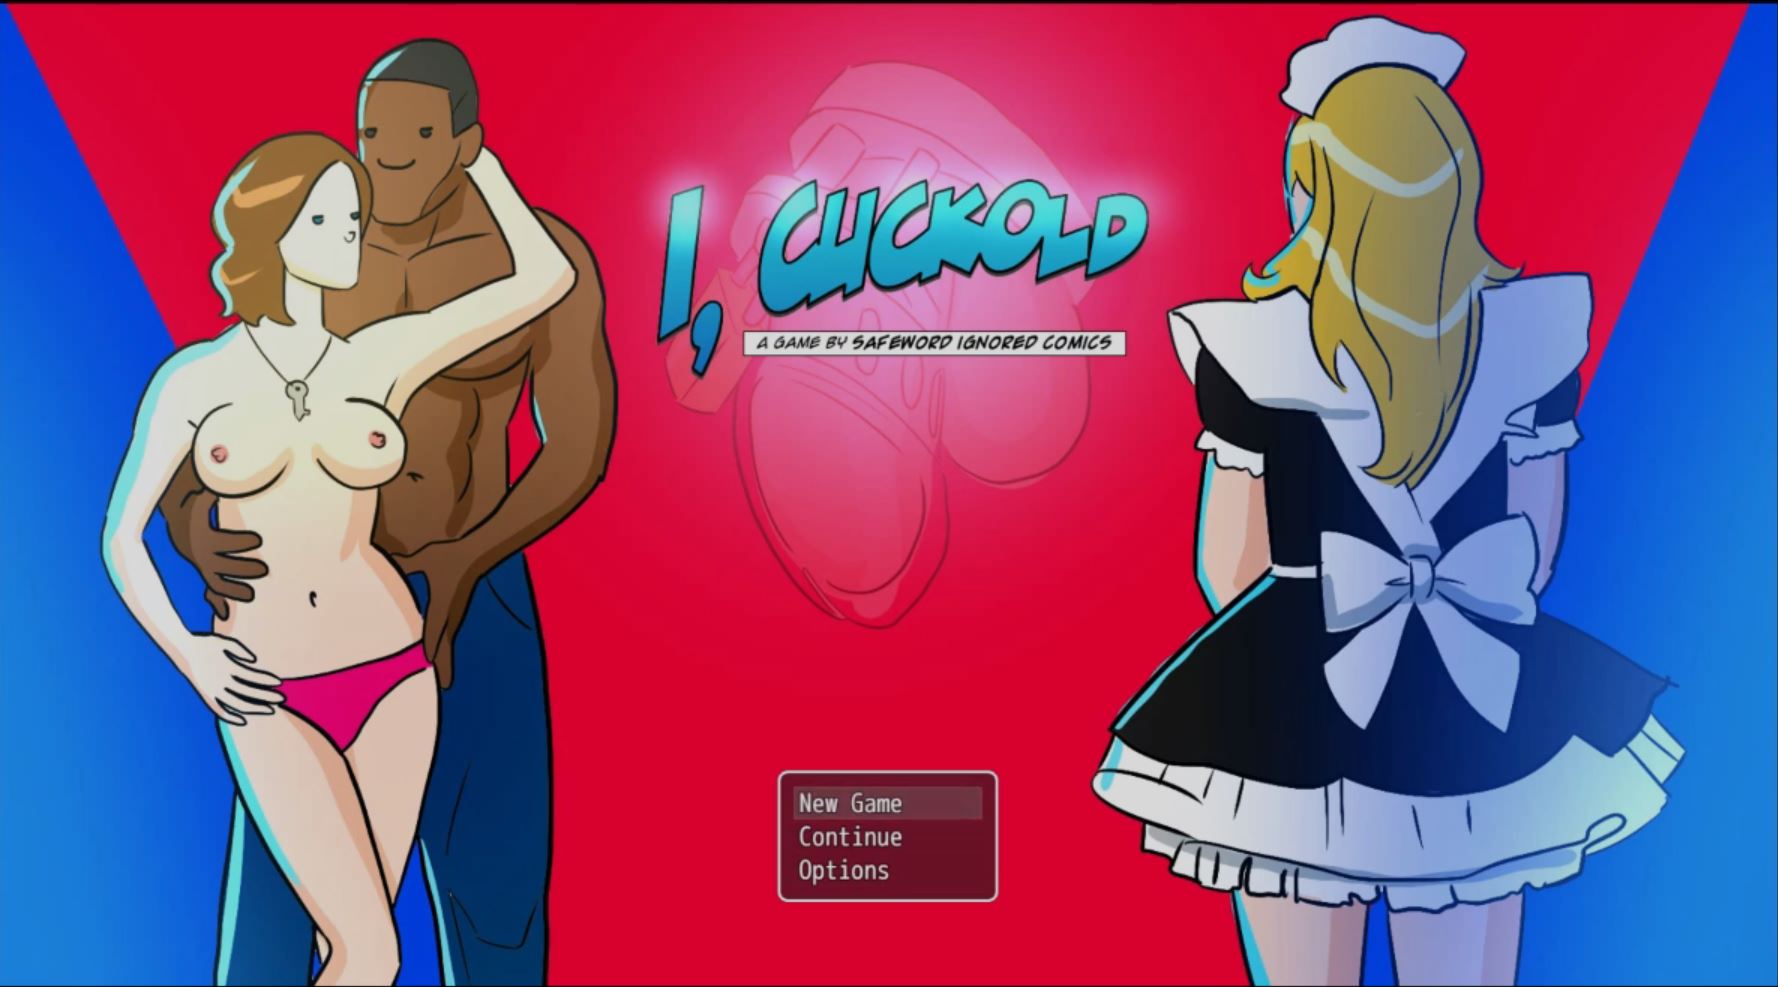 Overview: From the artist of Safeword Ignored comes a game that lets you li...